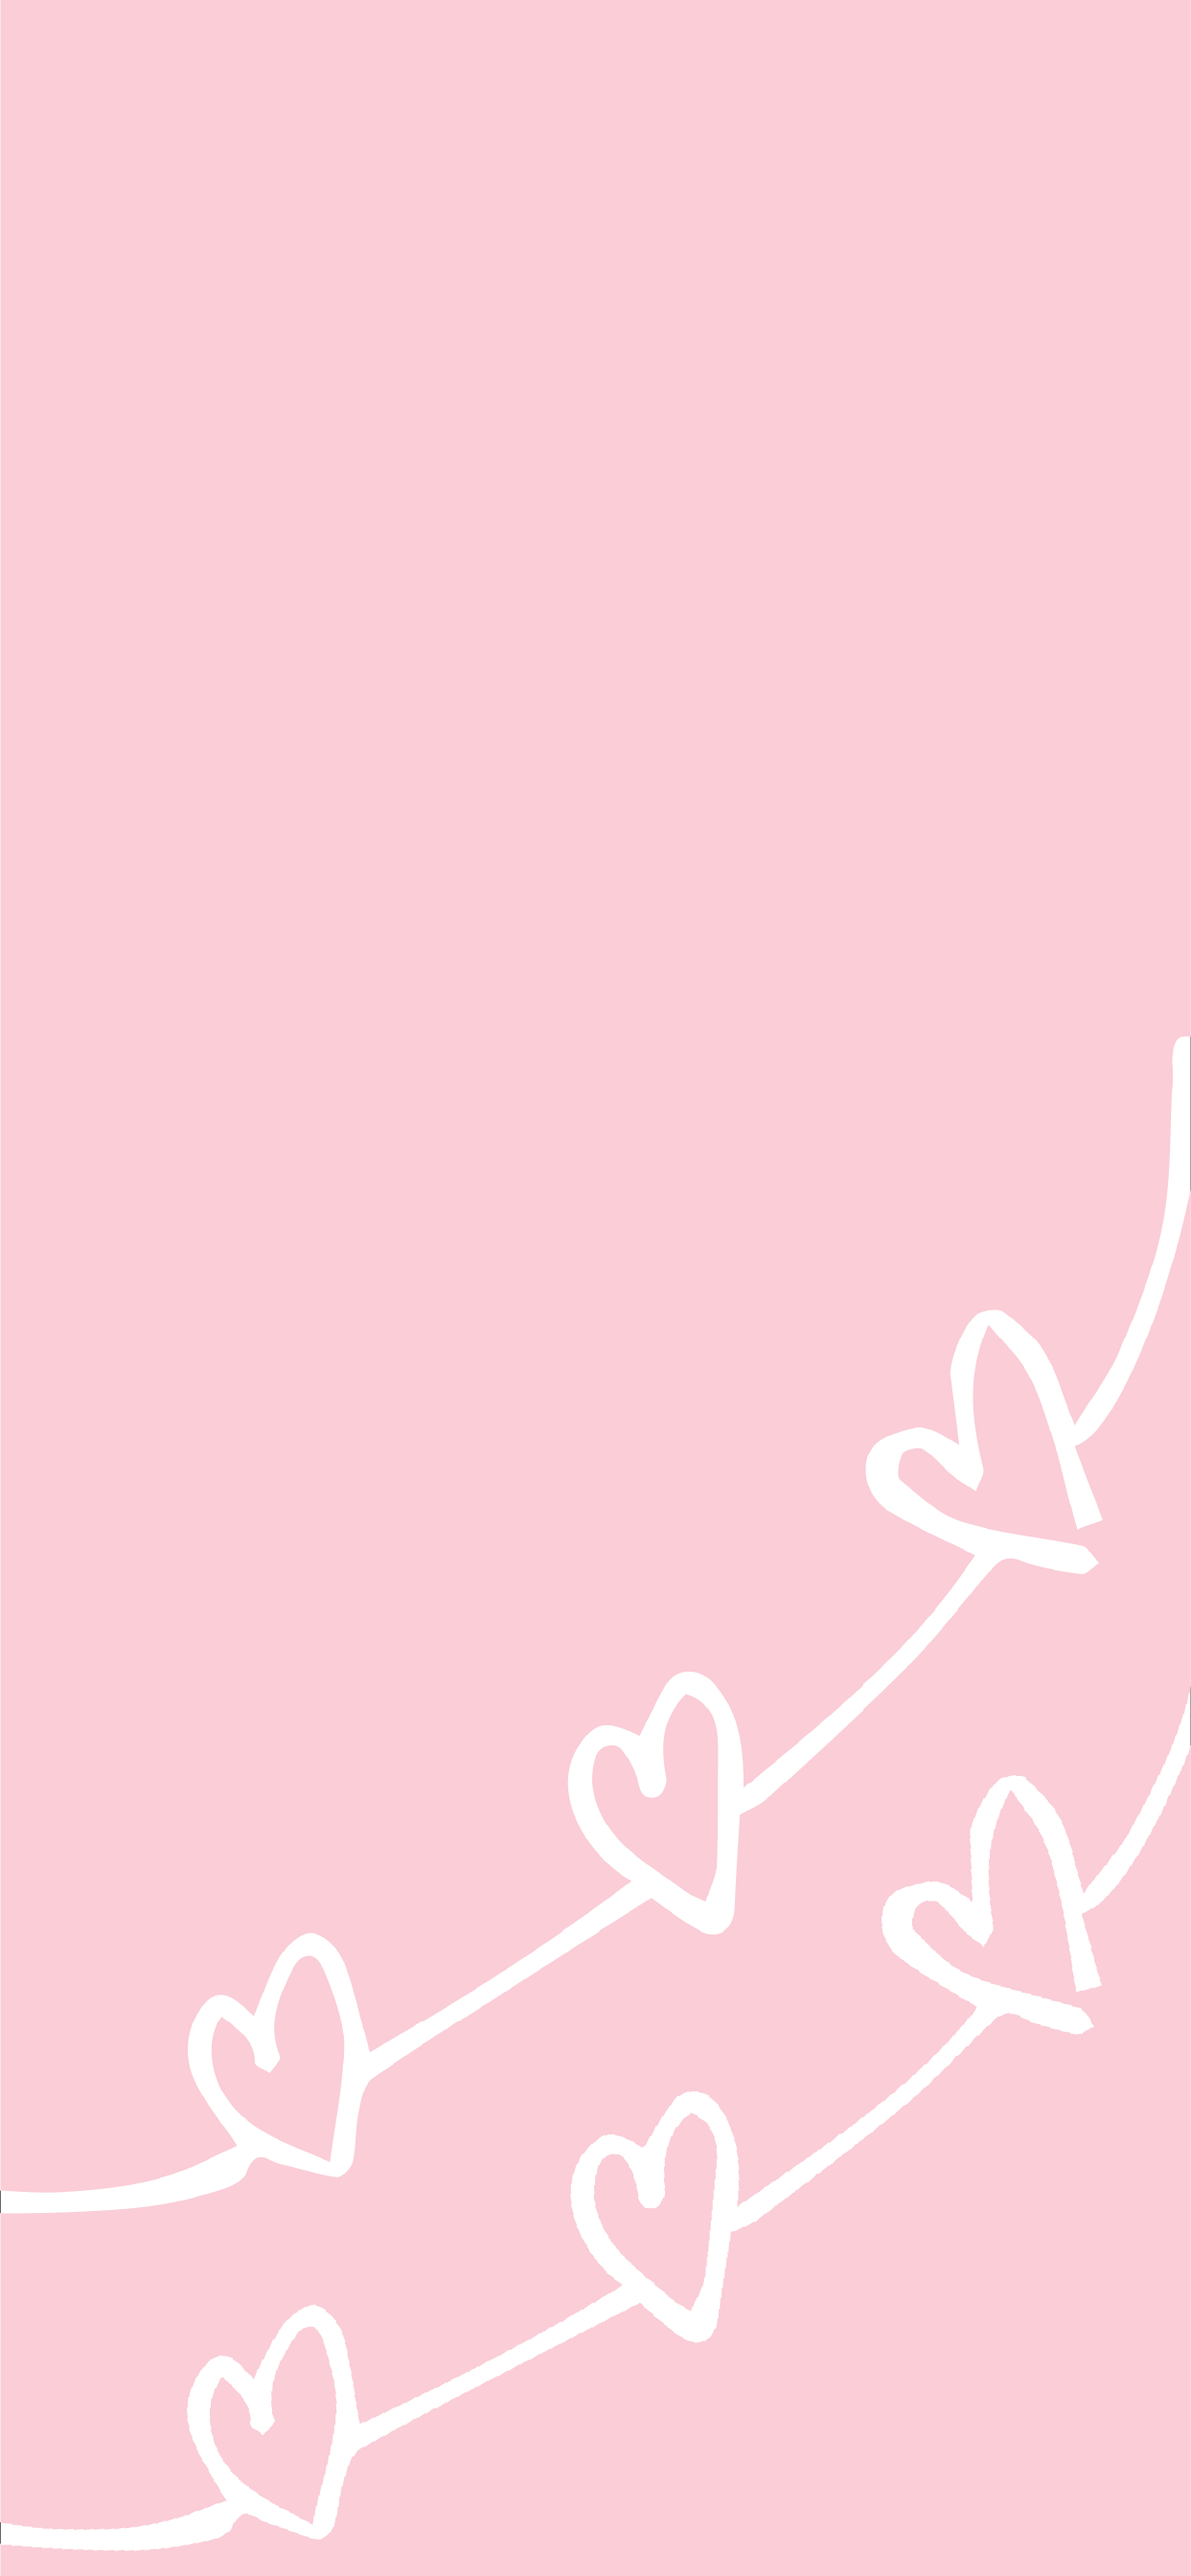 A pink background with white hearts on it - Valentine's Day